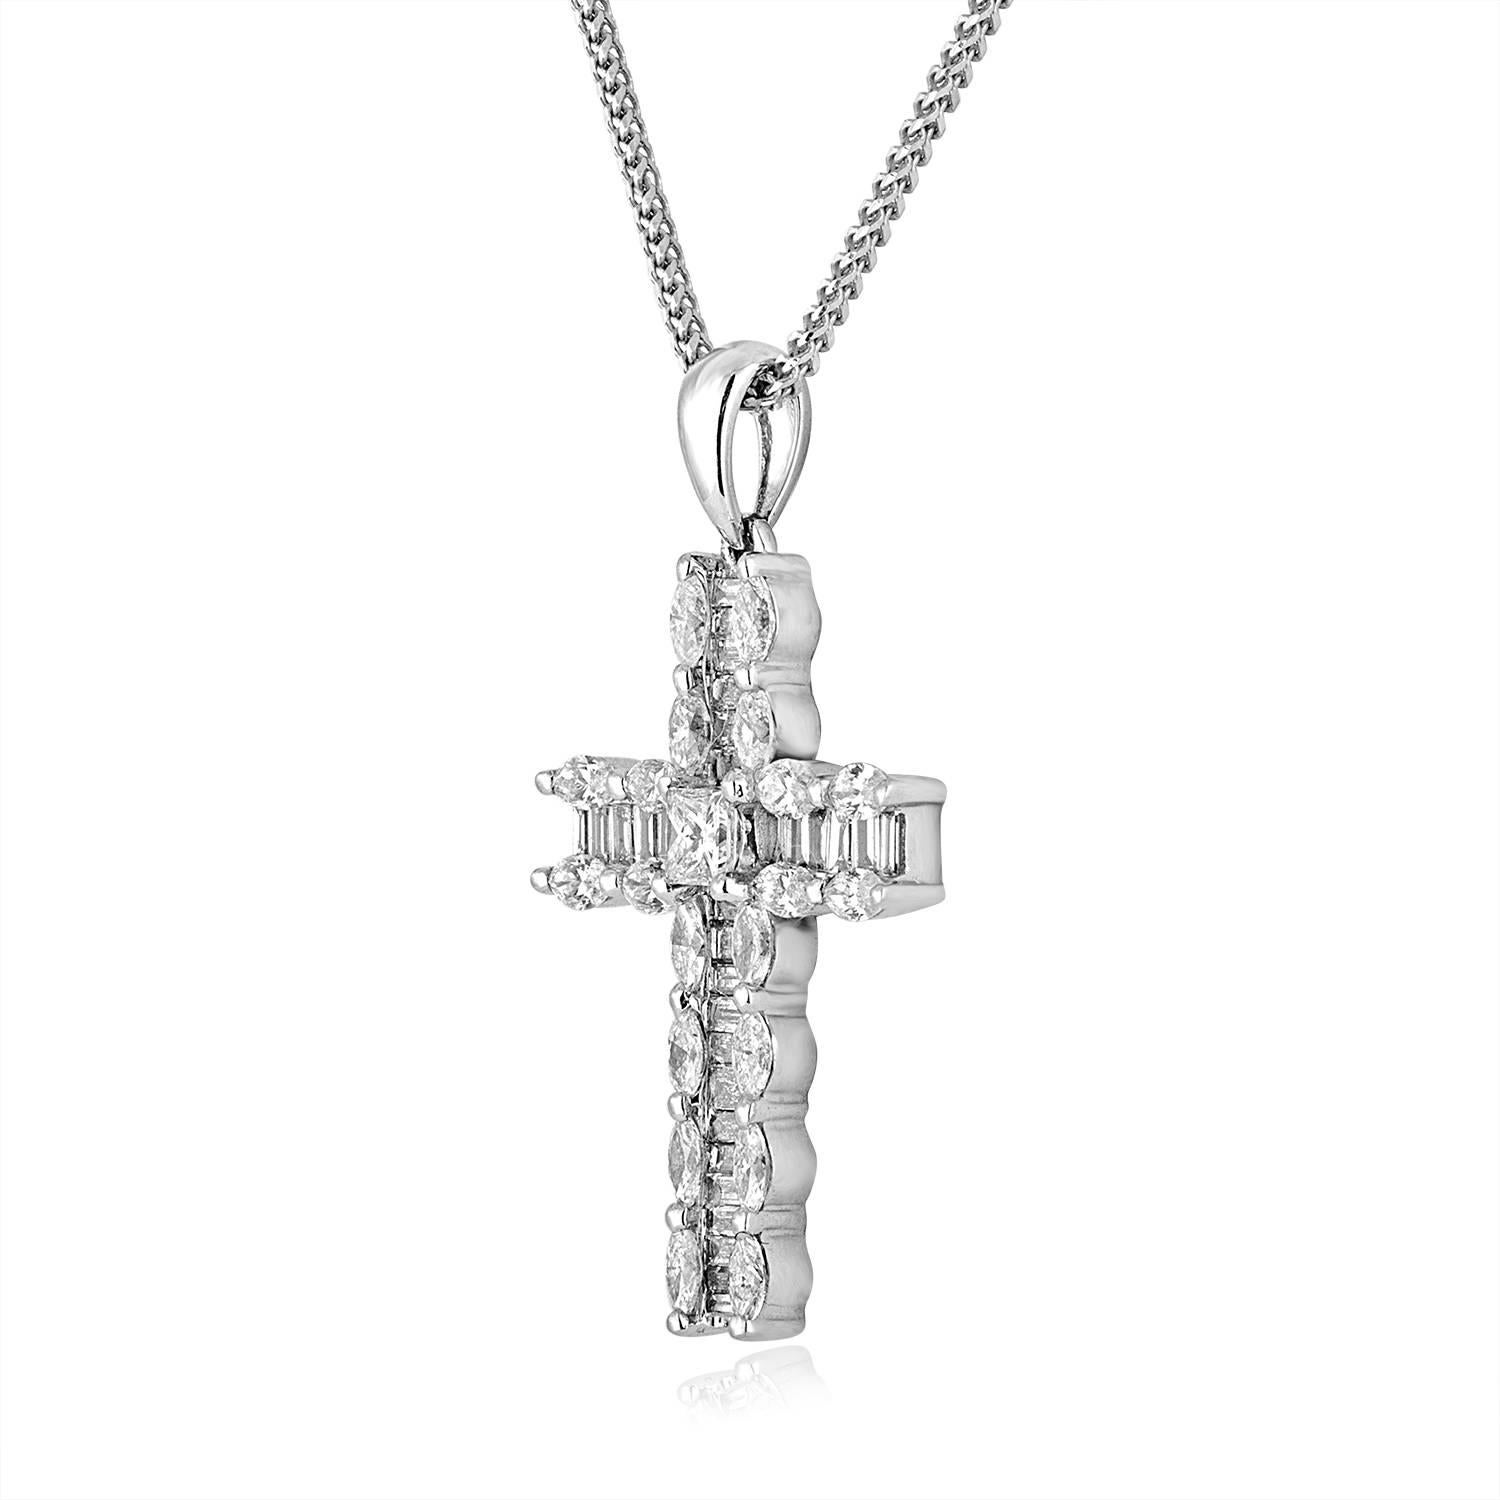 Beautiful 18K White Gold Cross
There are 1.46 Carats in Diamonds F/G VS/SI
The cross measure approximately 1.25